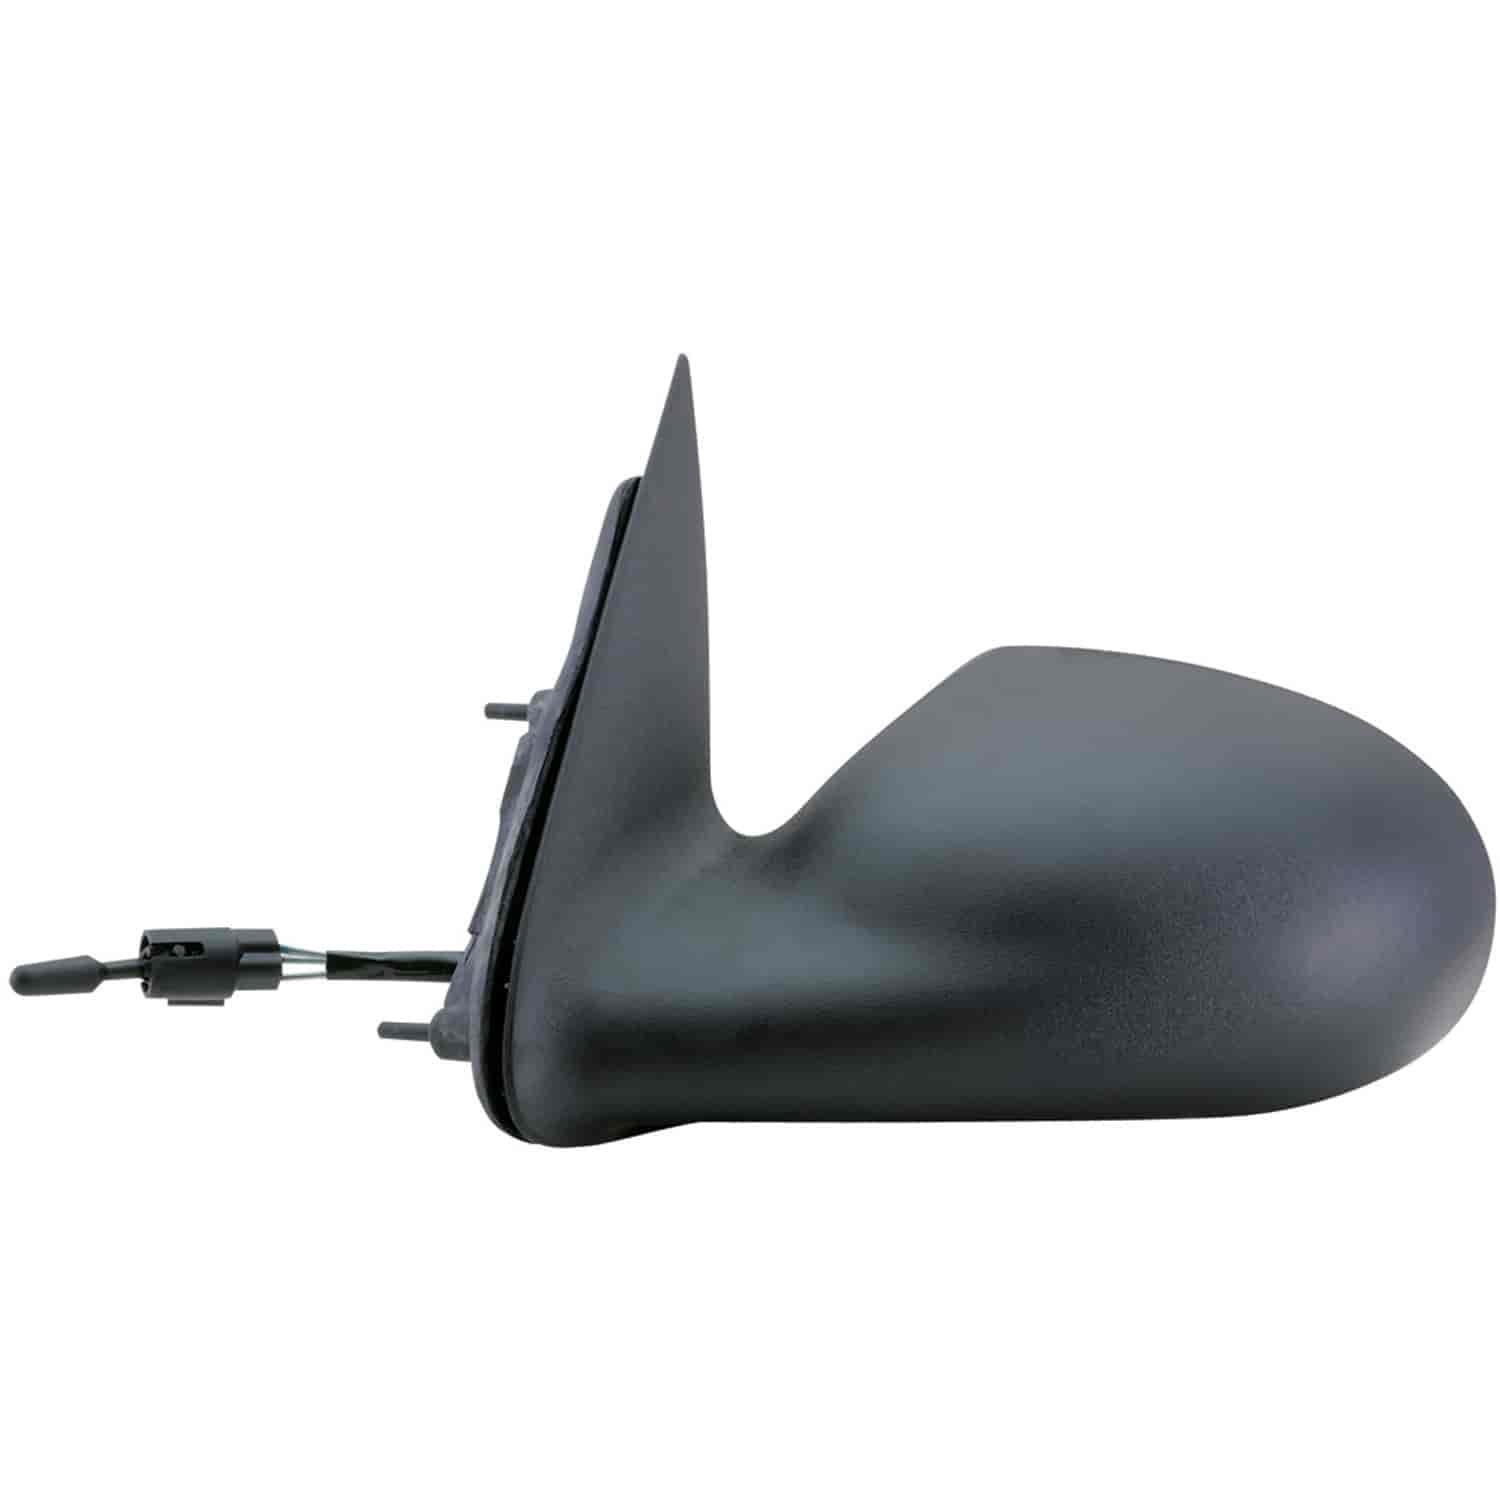 OEM Style Replacement mirror for 01-03 Chrysler PT Cruiser driver side mirror tested to fit and func